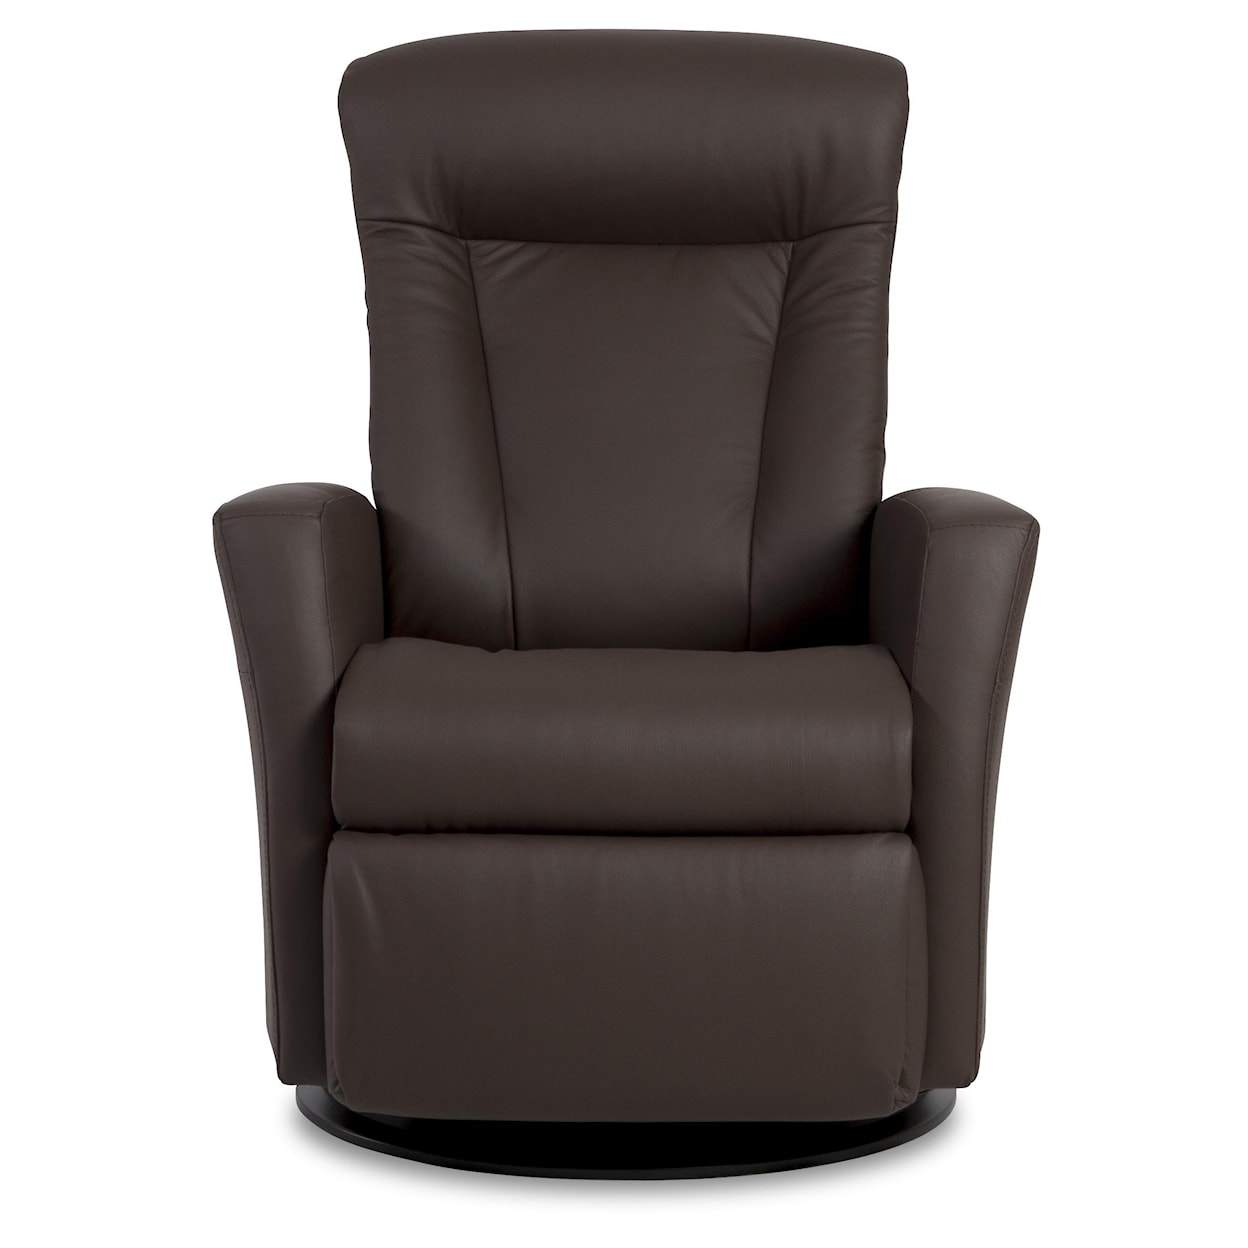 IMG Norway Prince  Prince Relaxer Recliner in Large Size